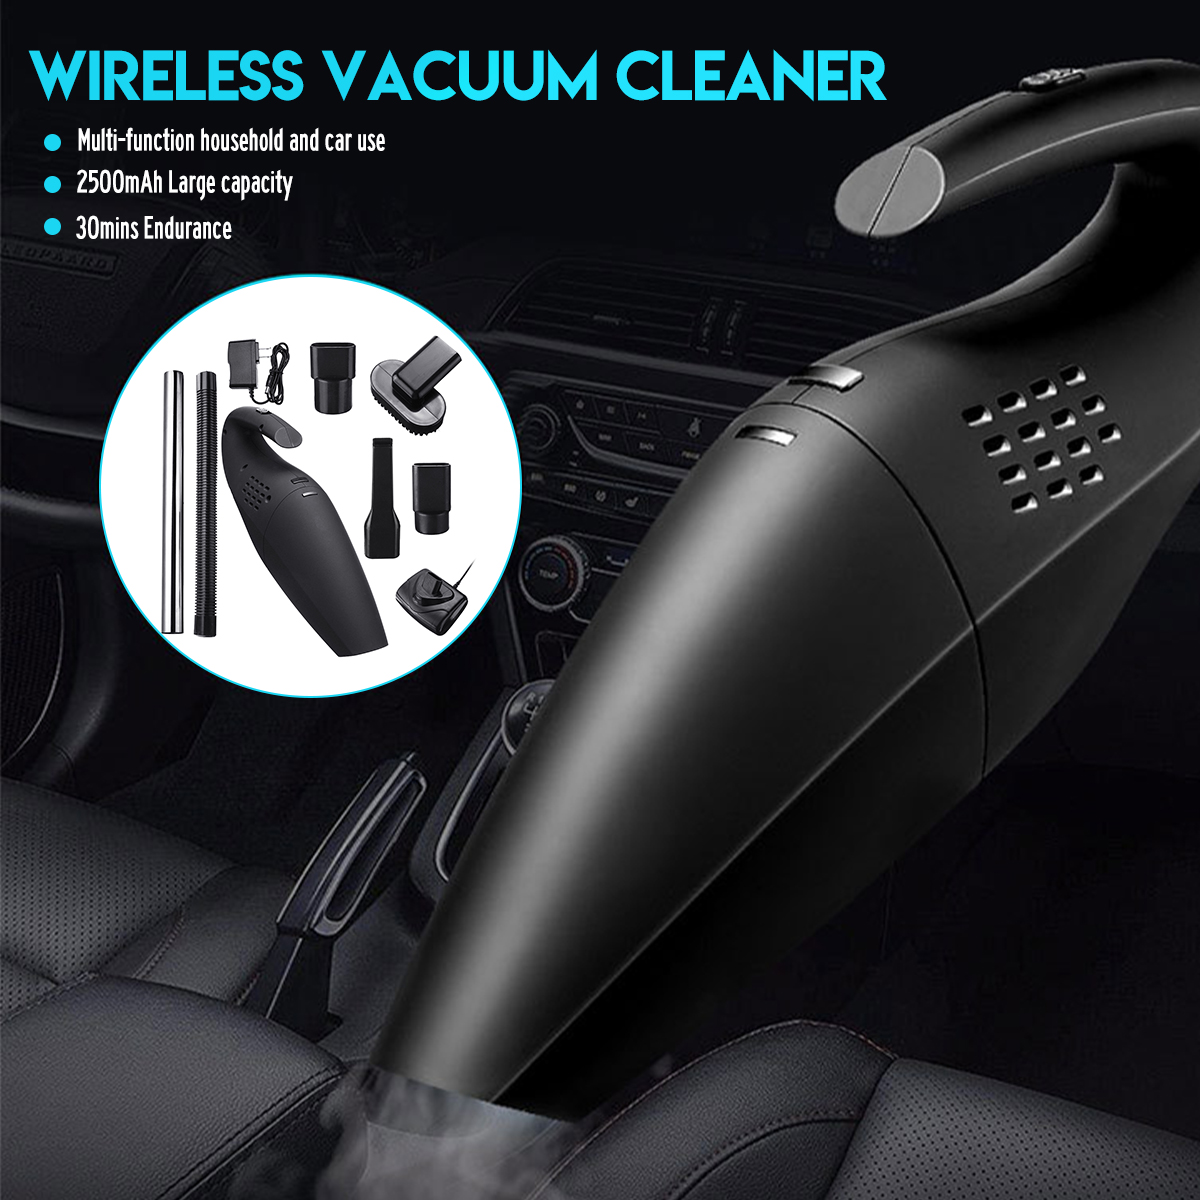 110-240V-120W-Handheld-Car-Wireless-Vacuum-Cleaner-With-High-Power-Dual-Purpose-Wet--Dry-Portable-Re-1581227-2